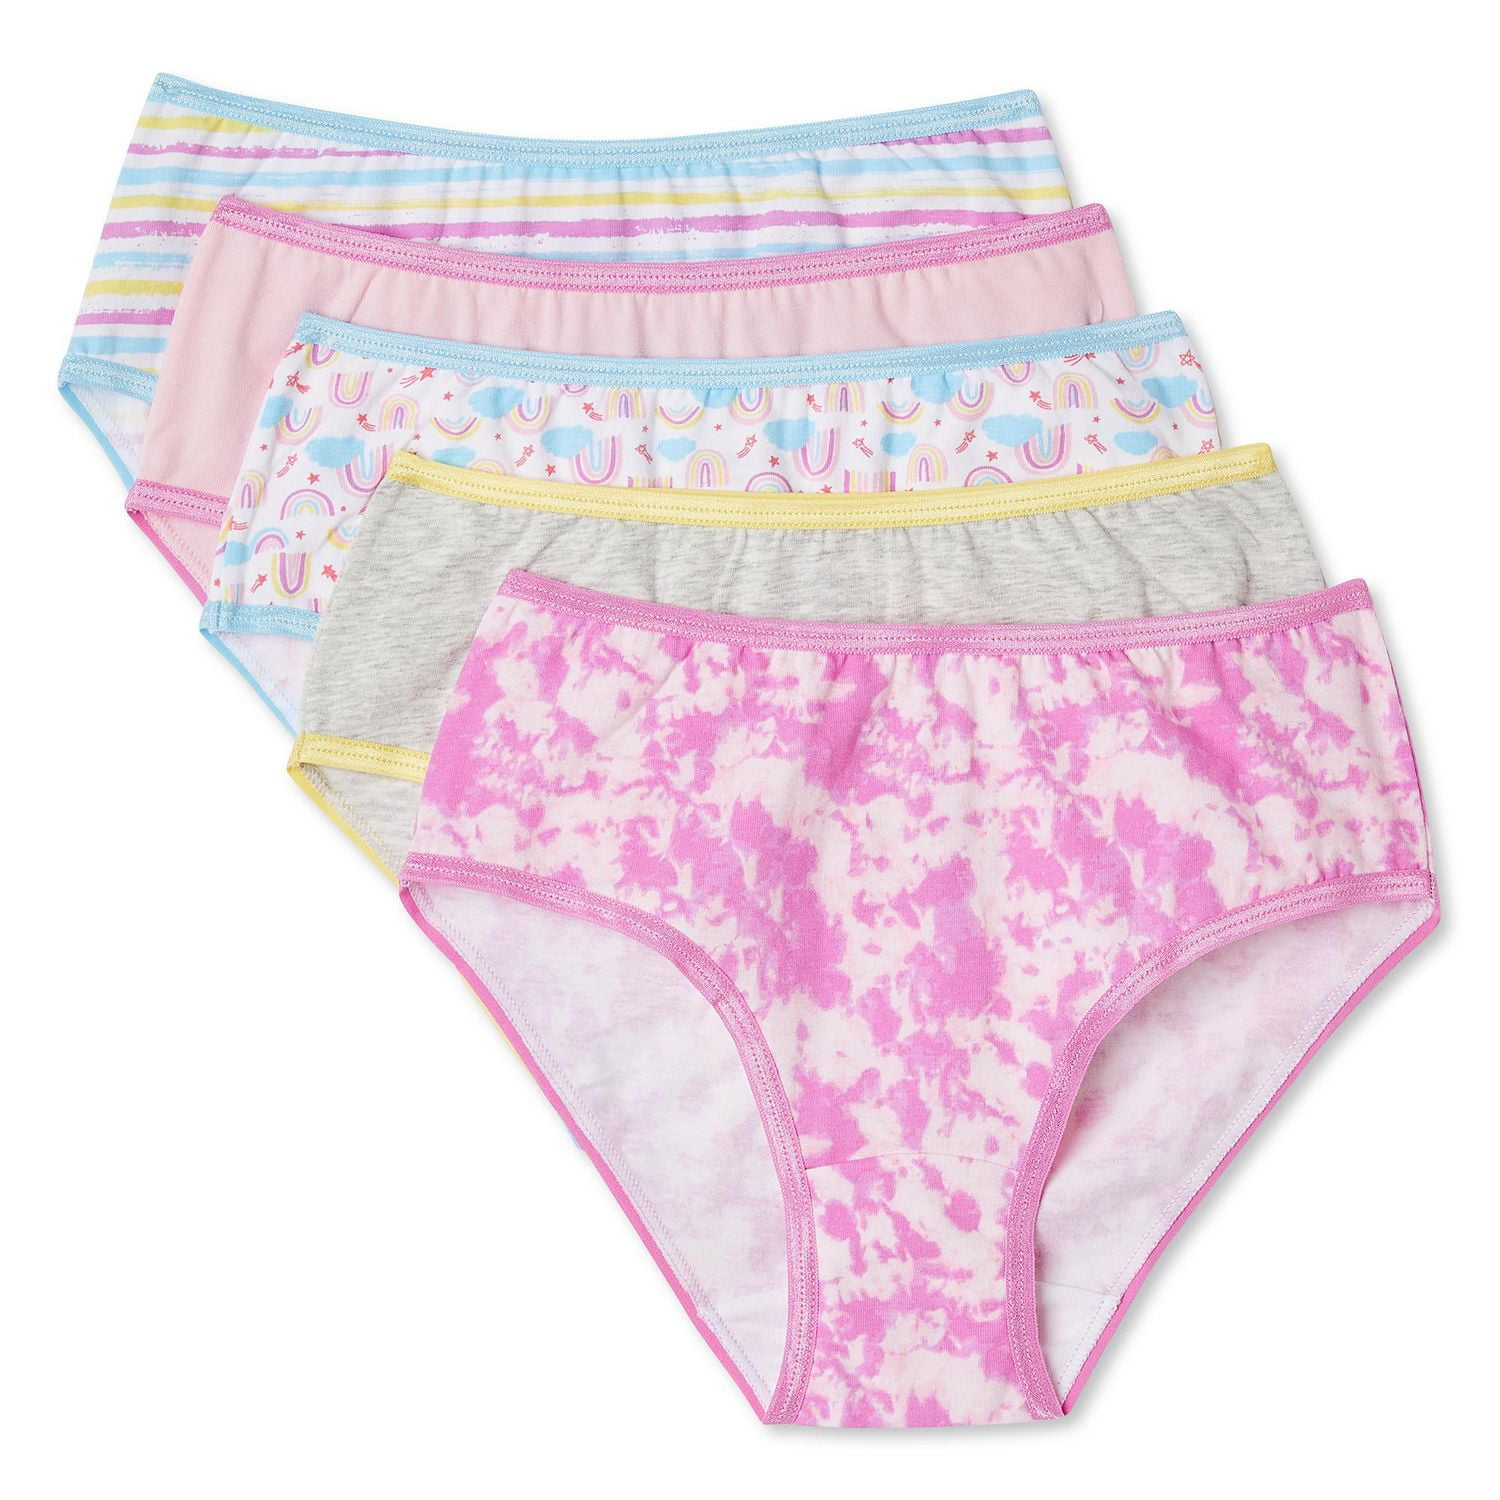 24 Pieces Girl's Underwear 5-Packs By 1000% Cute - Sizes 4-12/14